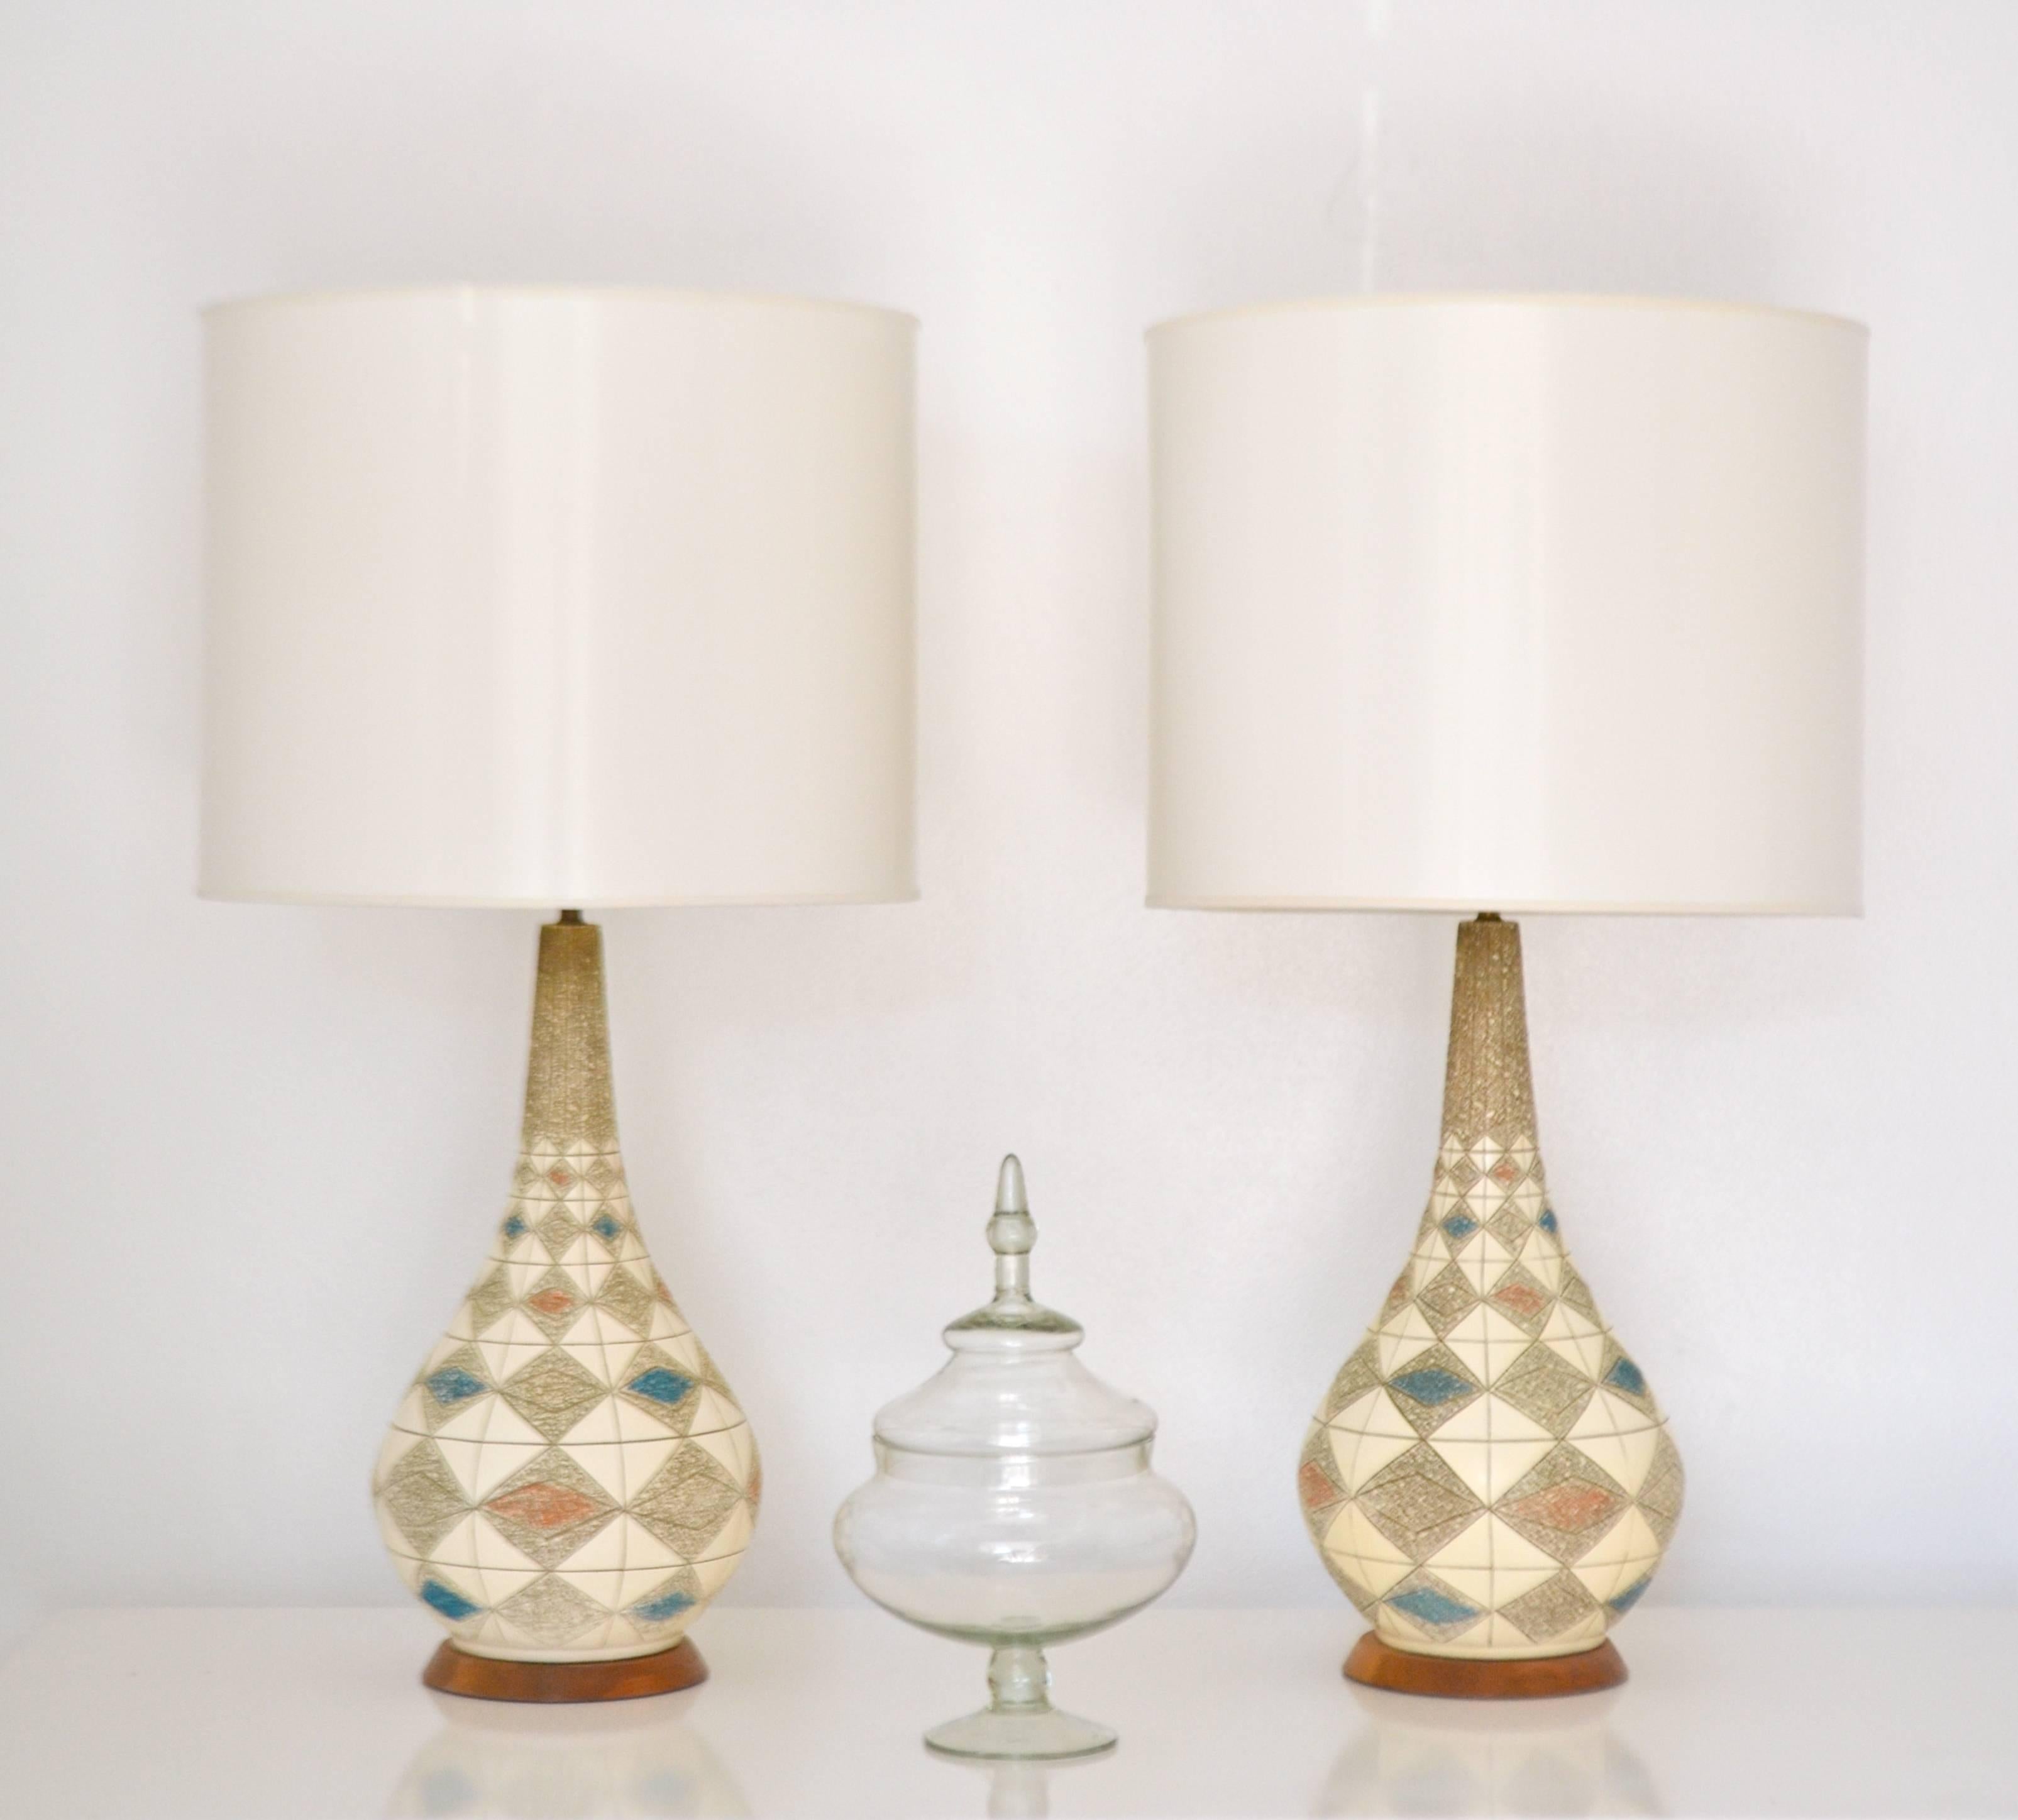 Striking pair of midcentury ceramic table lamps, circa 1950s -1960s. These stunning polychrome glazed highly graphic and decorative lamps are mounted on turned walnut bases and wired with brass fittings. Shades not included.
Measurements: 38